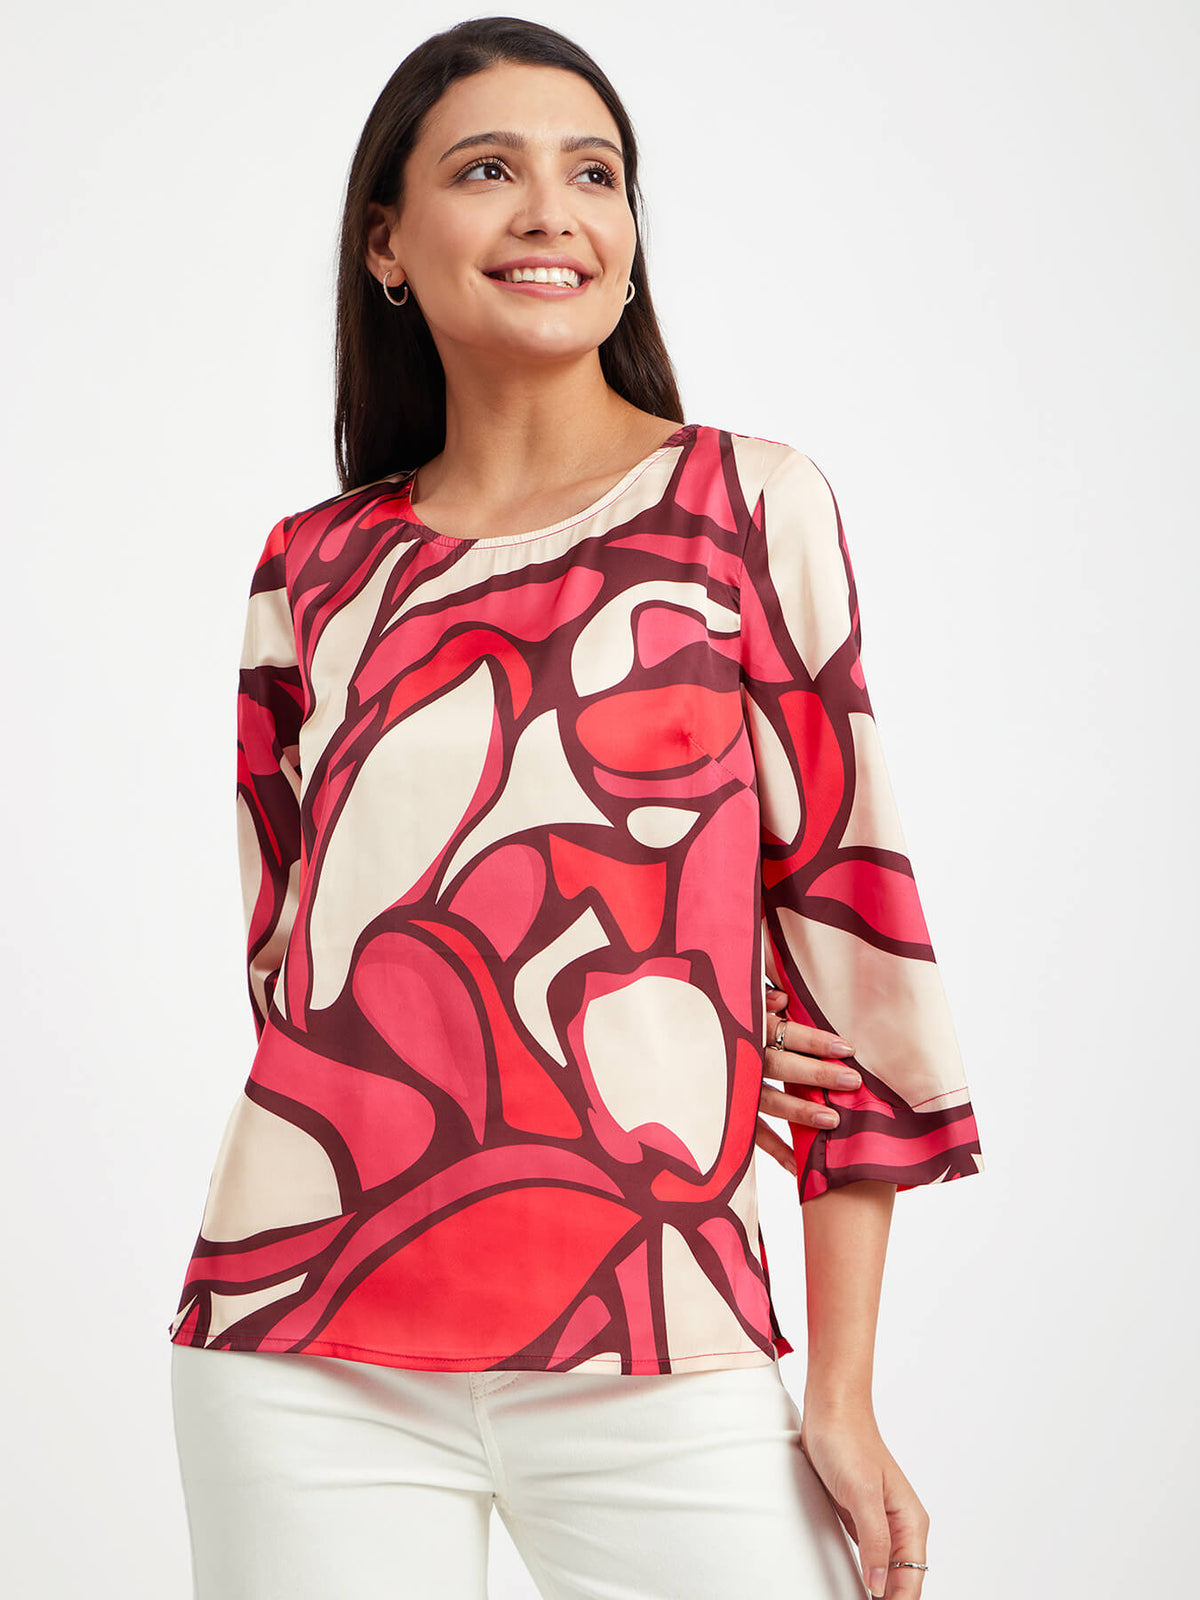 Satin Floral Print Top - Red And Beige